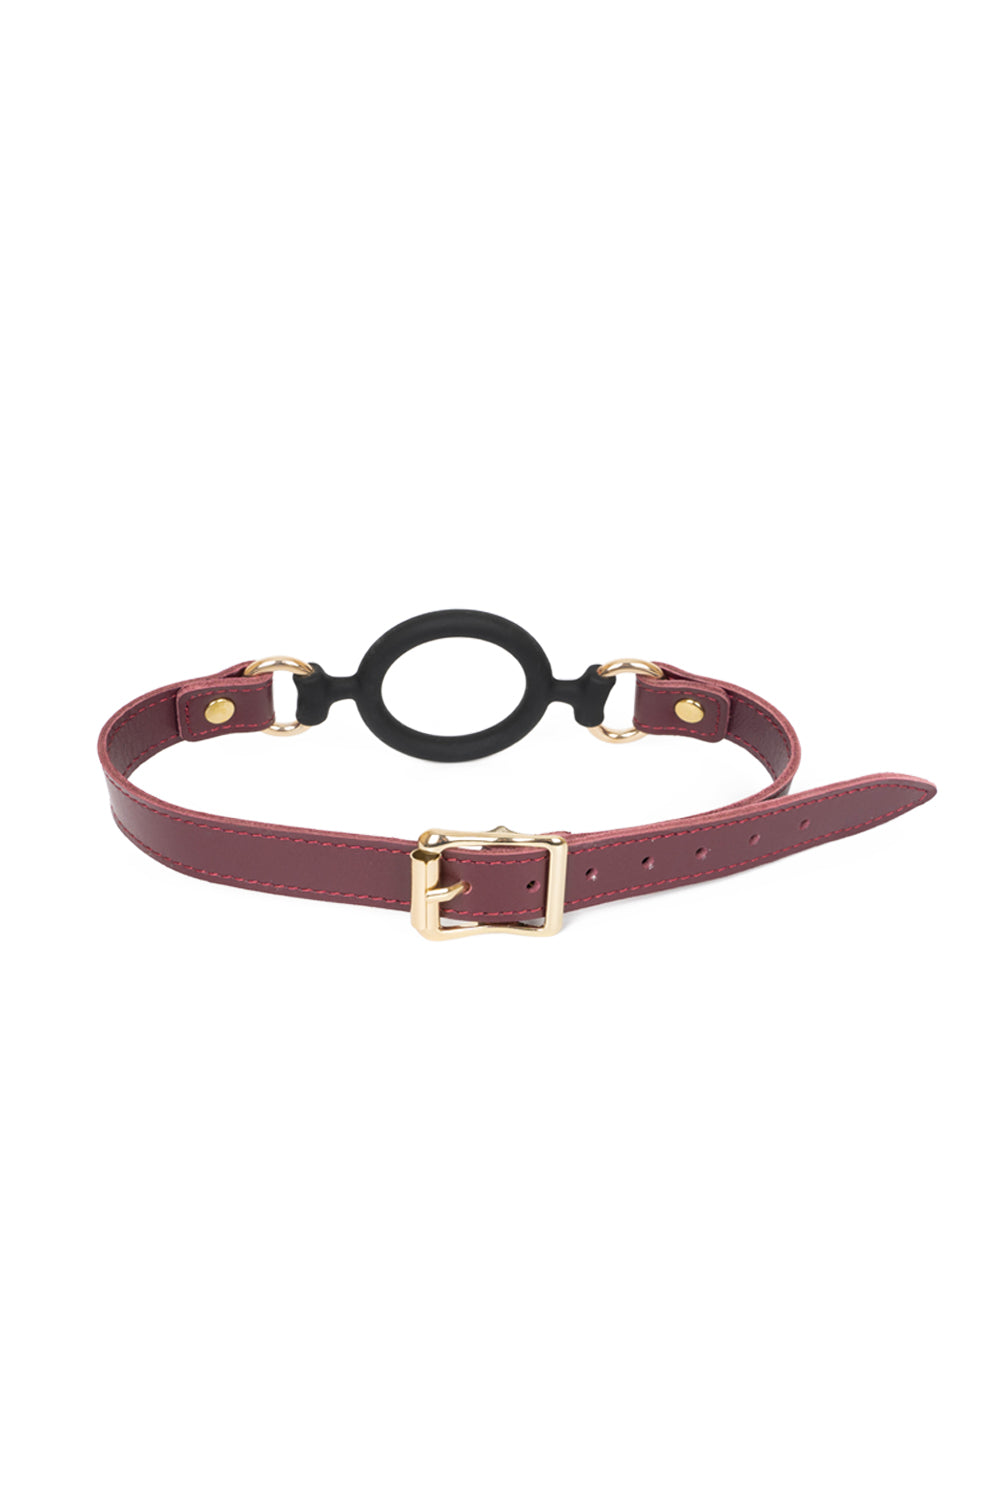 Soft Silicone Mouth Ring Gag. Burgundy